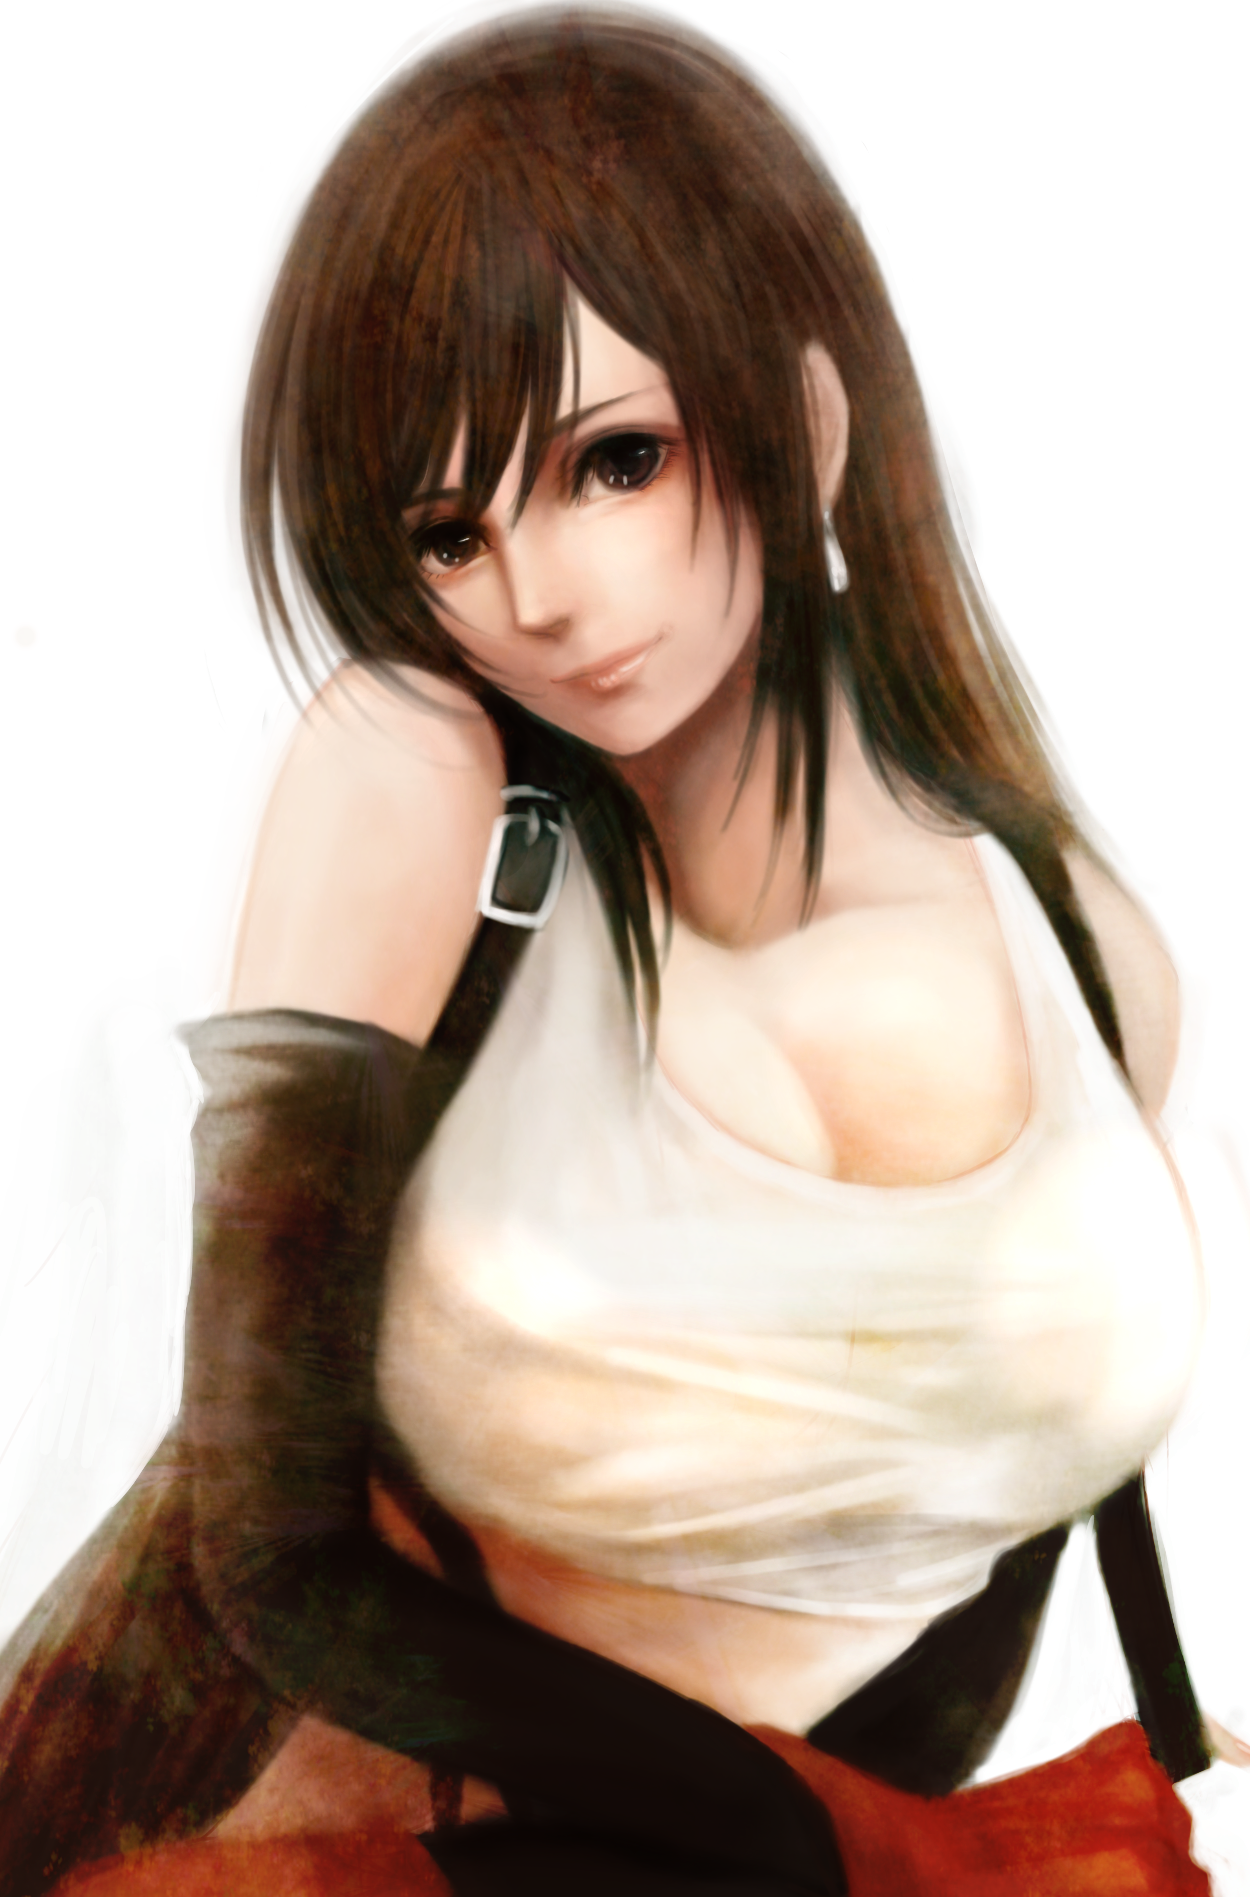 My First Crush Was Tifa Lockhart From Final Fantasy - Tifa Lockhart Wallpaper Hd , HD Wallpaper & Backgrounds